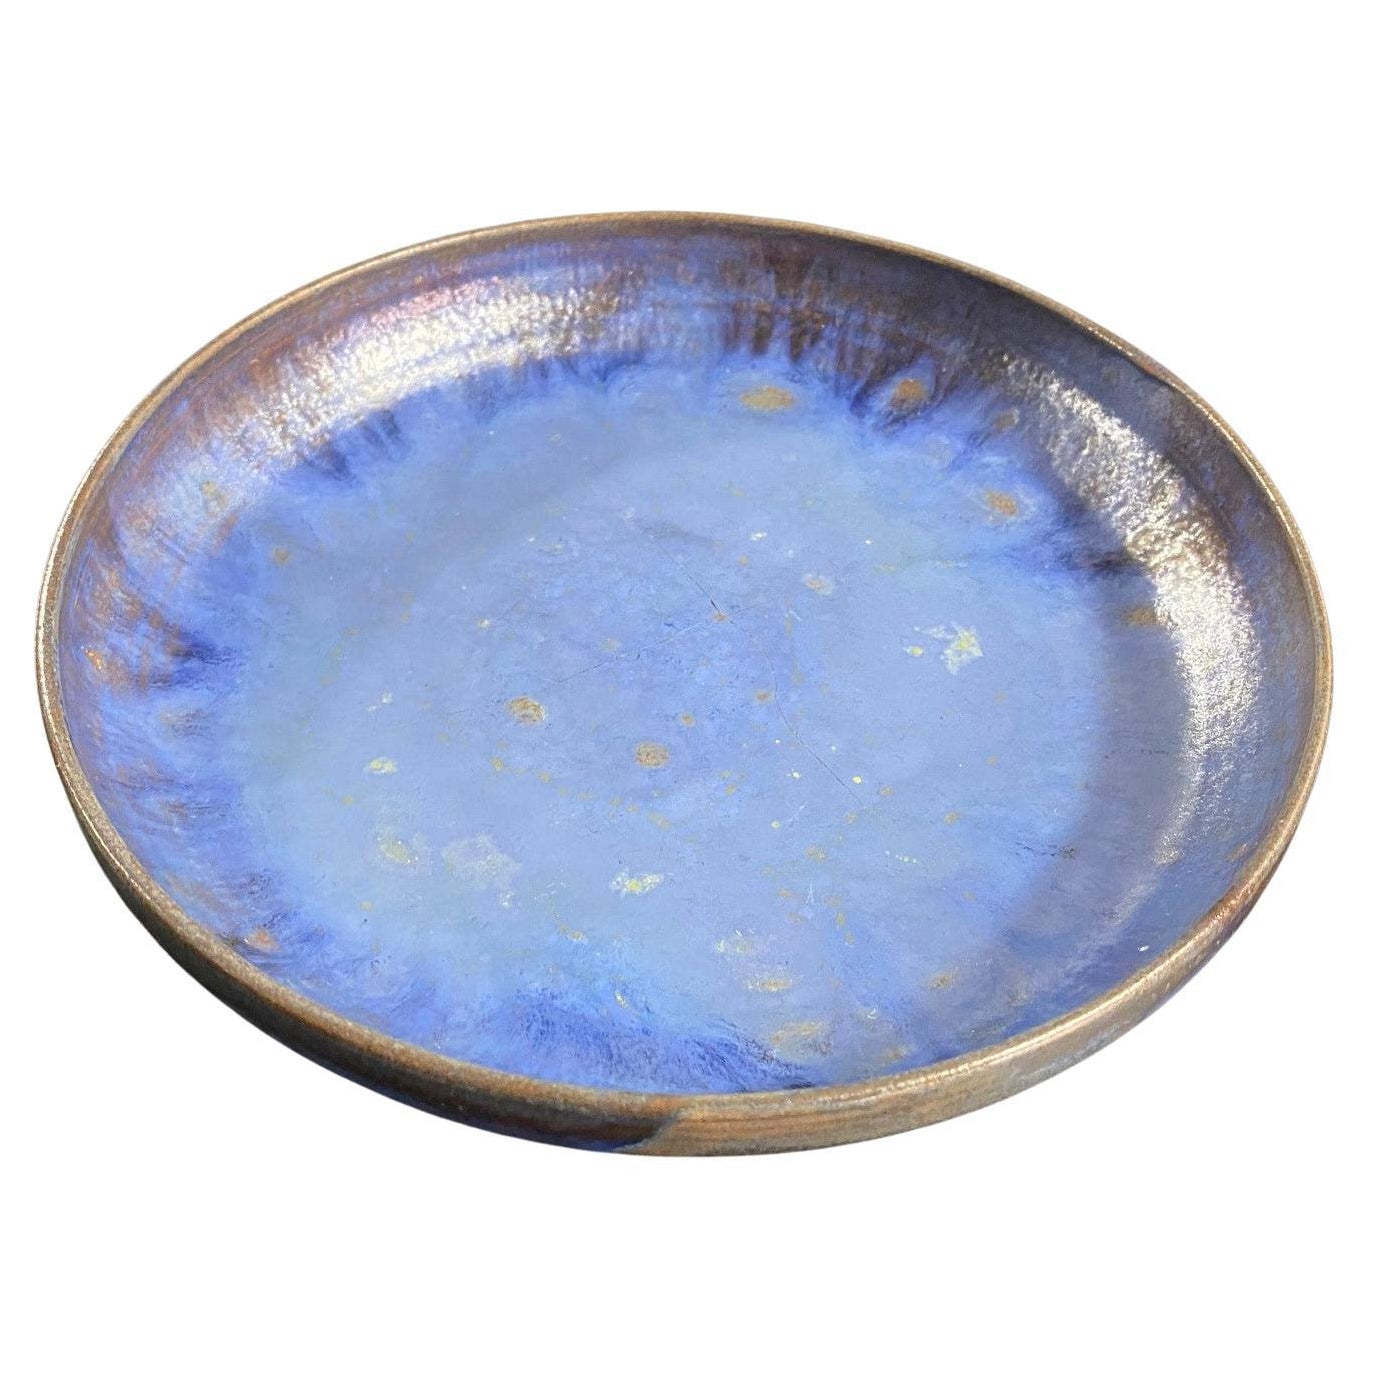 Beatrice Wood Signed Volcanic Ash Blue Iridescent Luster Studio Pottery Bowl